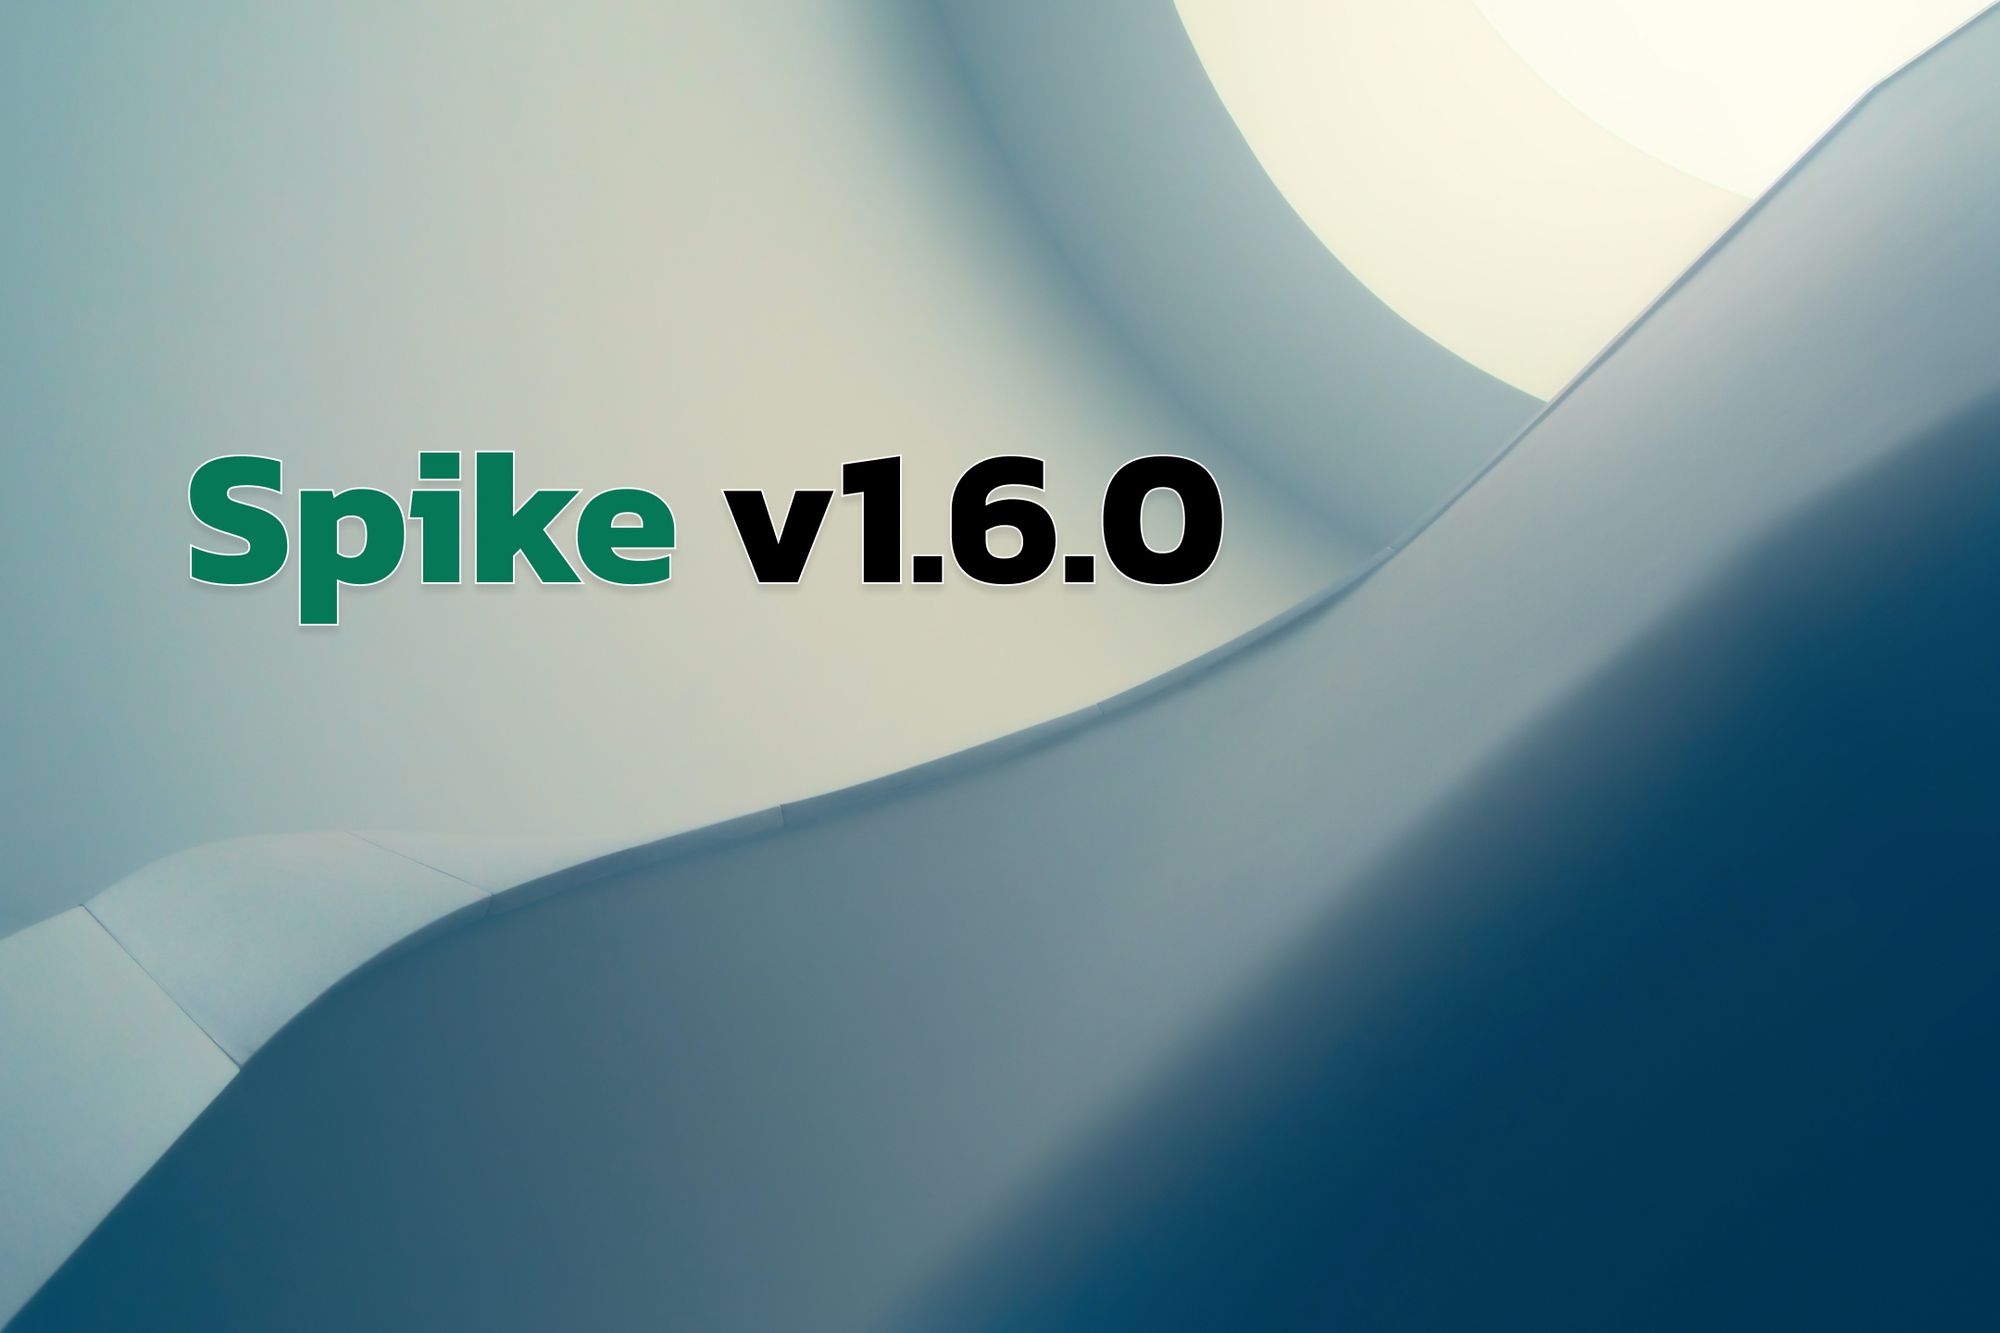 Abstract image with the text "Spike v1.6.0"